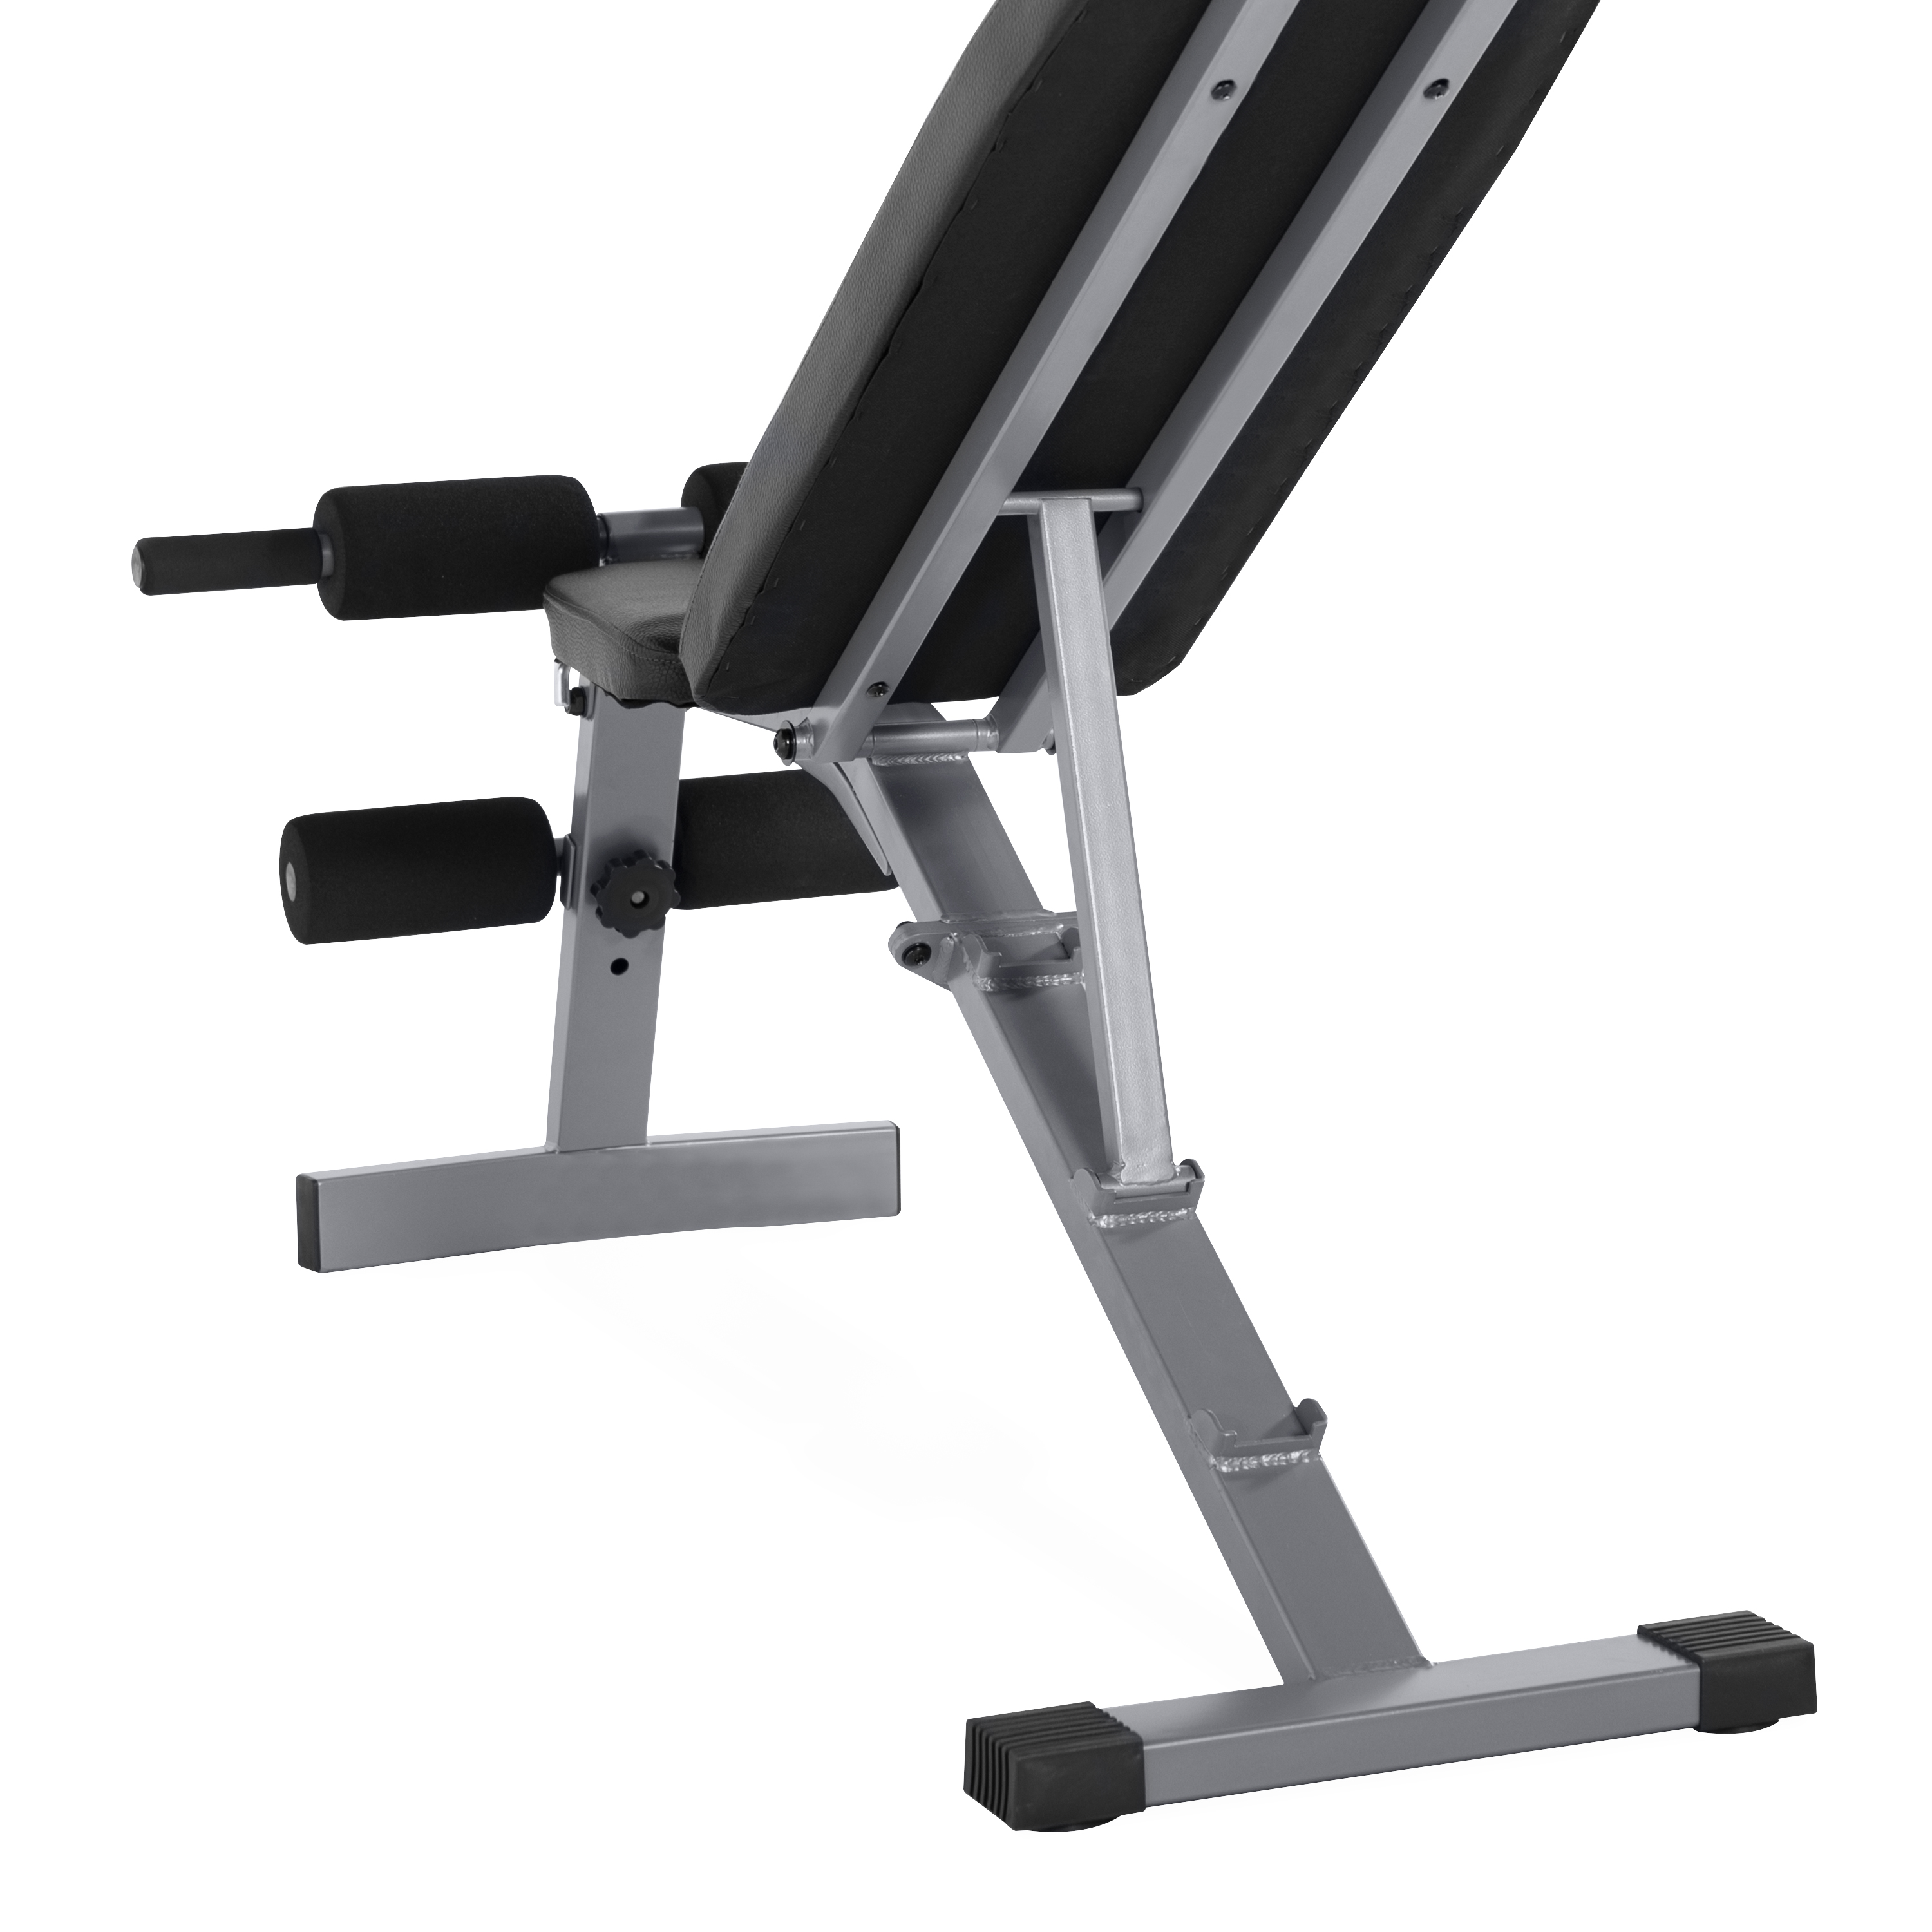 CAP Strength Adjustable FID Workout Bench (600 lb Weight Capacity), Black & Gray - image 3 of 10